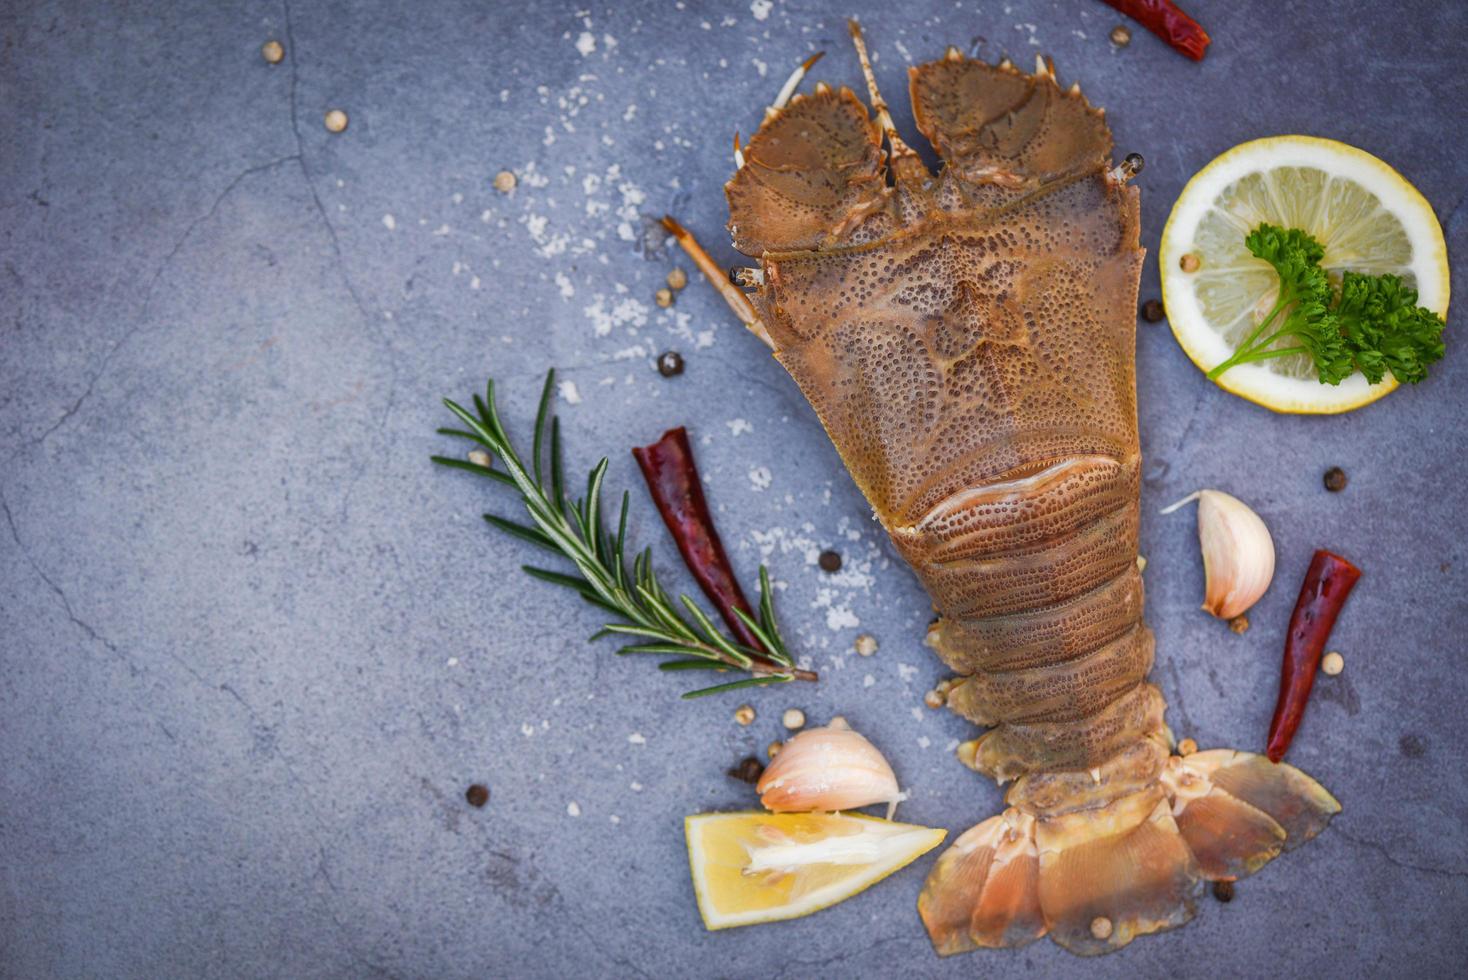 Raw flathead lobster shrimps with herbs and spices, fresh slipper lobster flathead for cooking on dark background in the seafood restaurant or seafood market, Rock Lobster Moreton Bay Bug photo